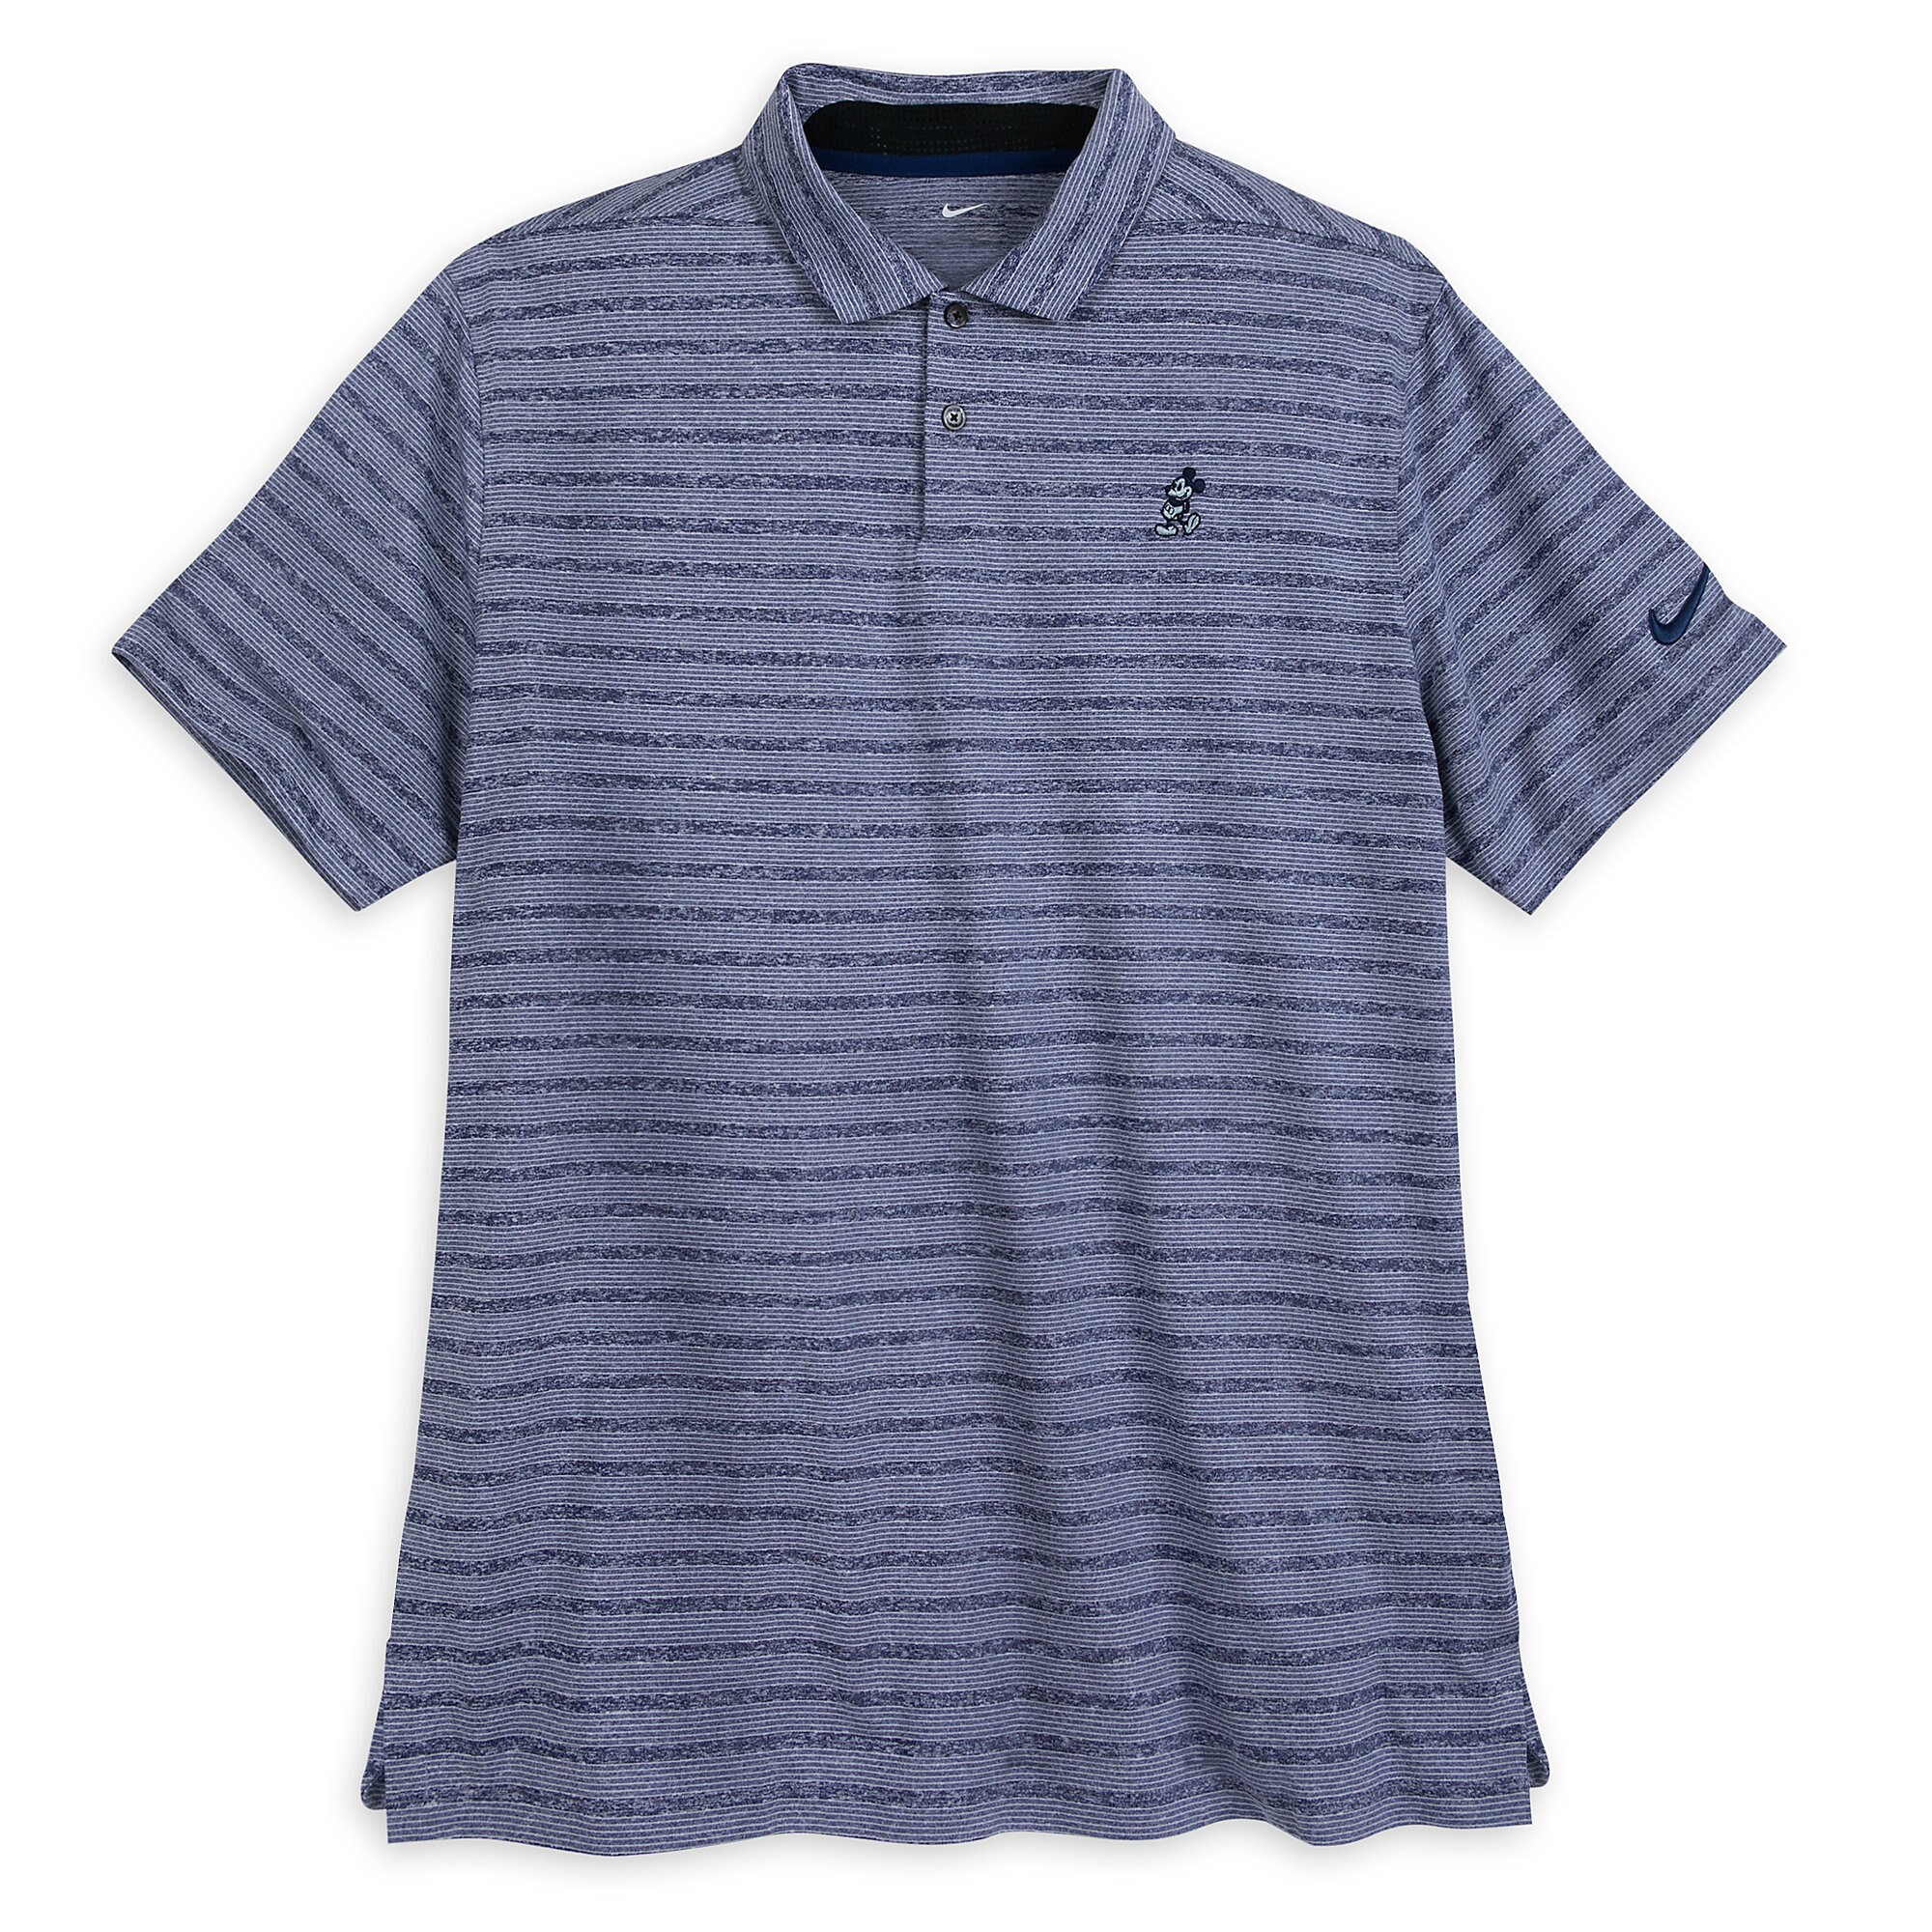 Mickey Mouse Striped Performance Polo Shirt for Men by Nike - Blue